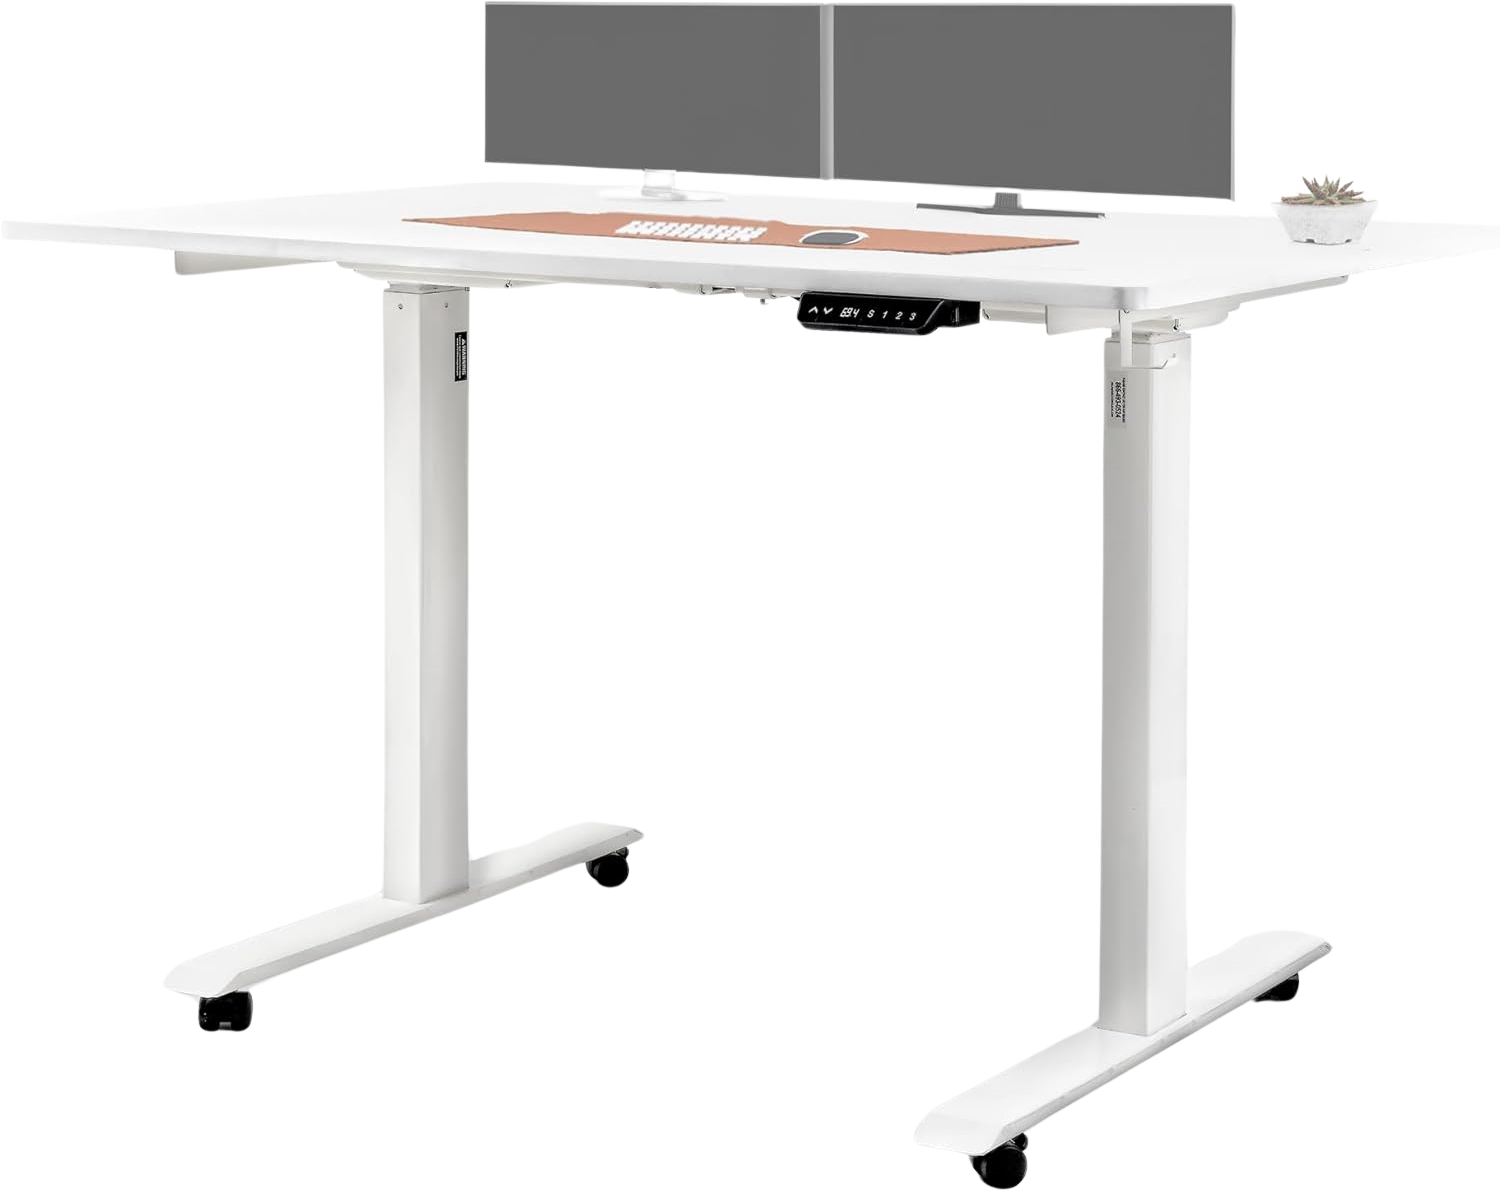 Super Handy, Super Handy GUT151 Standing Desk 48'' x 30'' with Wireless Charging 3 Memory Presets Adjustable Height up to 49'' White New